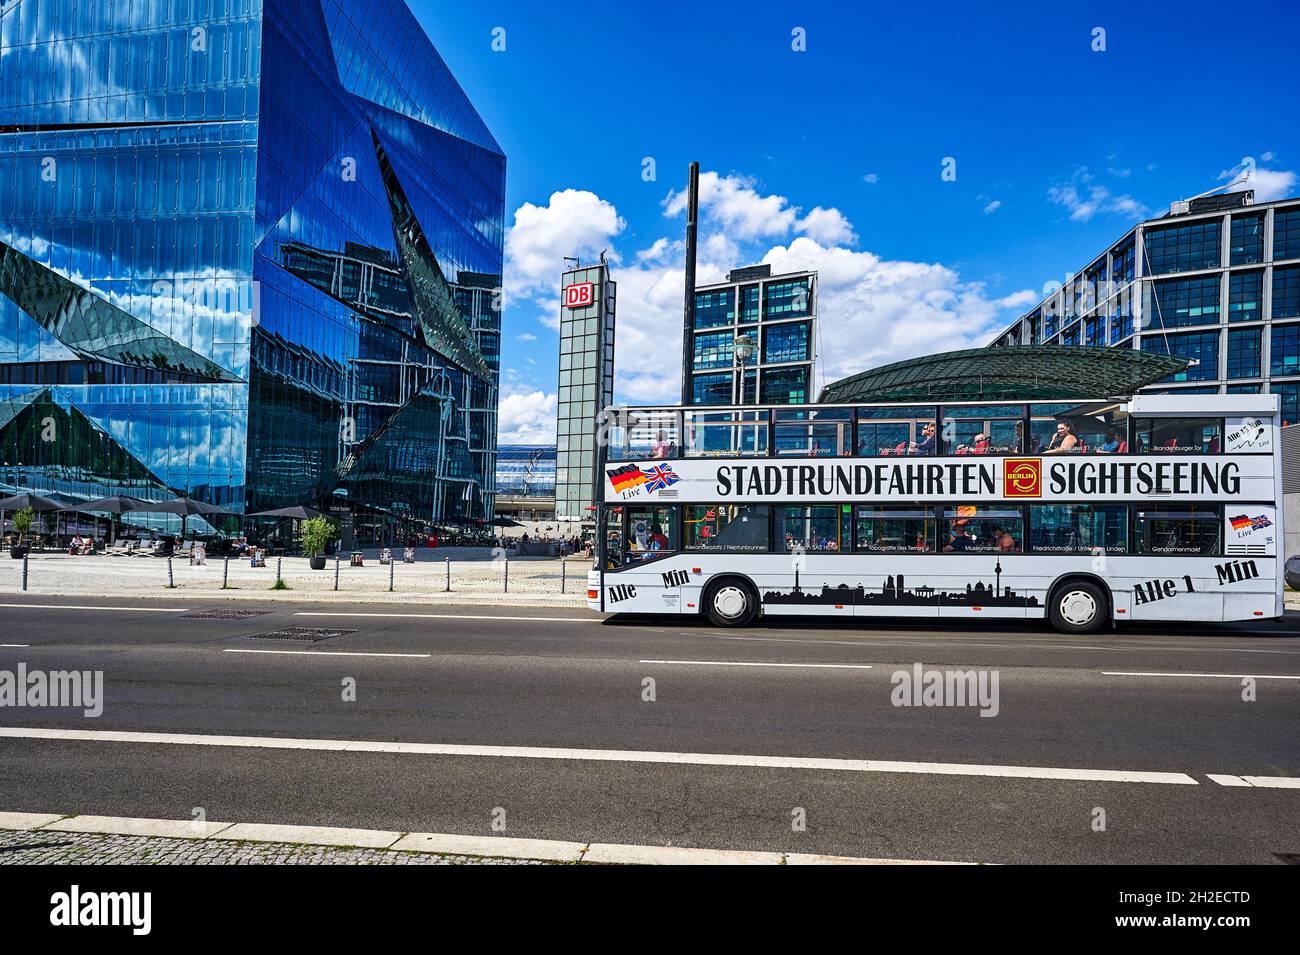 Berlin, Germany - July 29, 2021: Hop on hop off bus near the Hauptbahnhof in downtown Berlin. At the left side you can see the Cube Berlin. Stock Photo